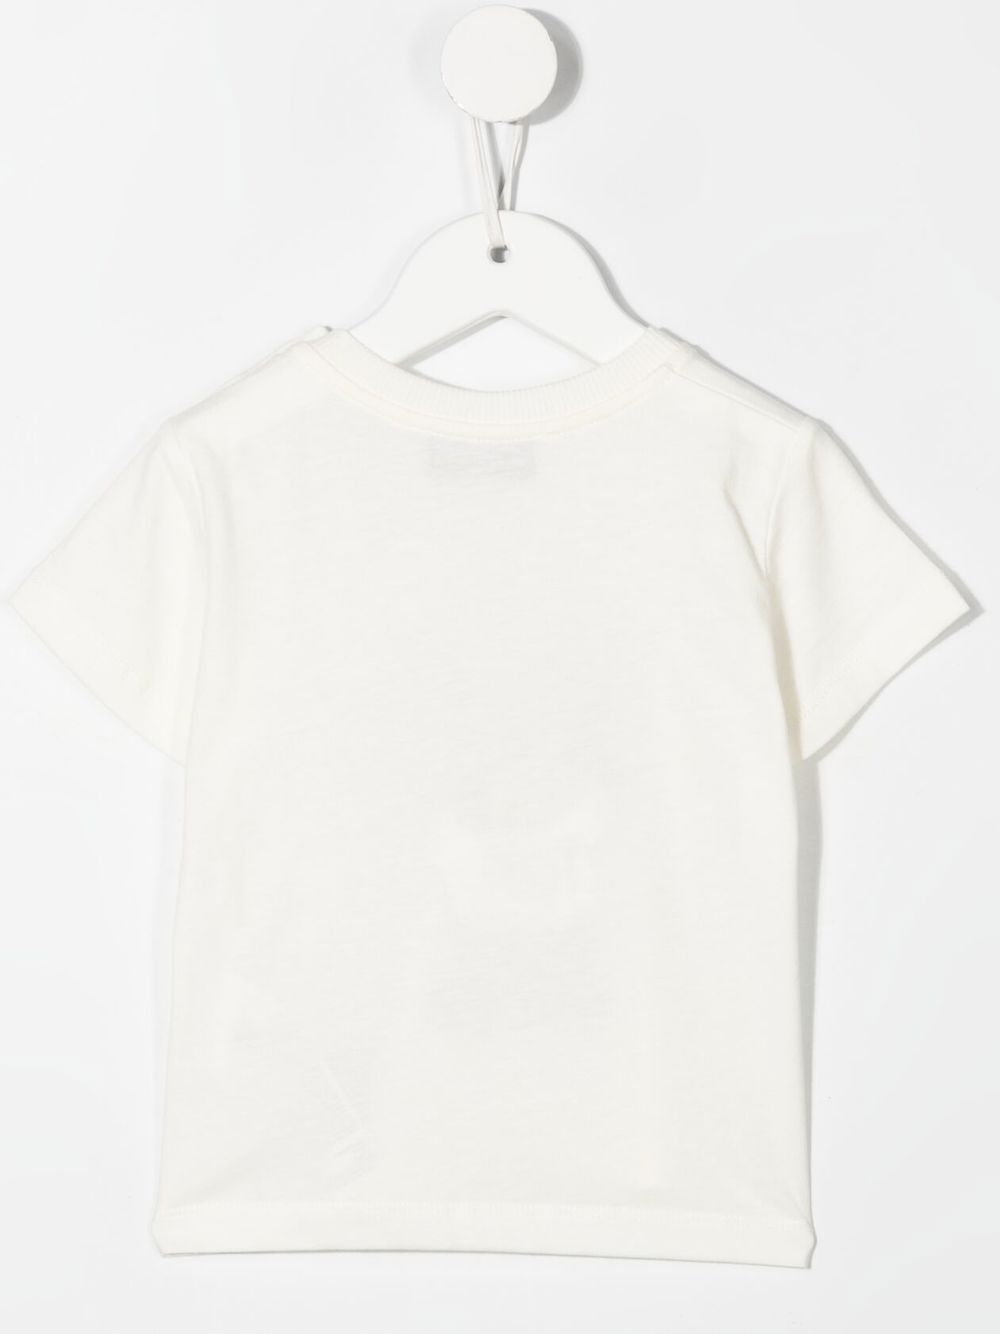 White t-shirt for babies with logo